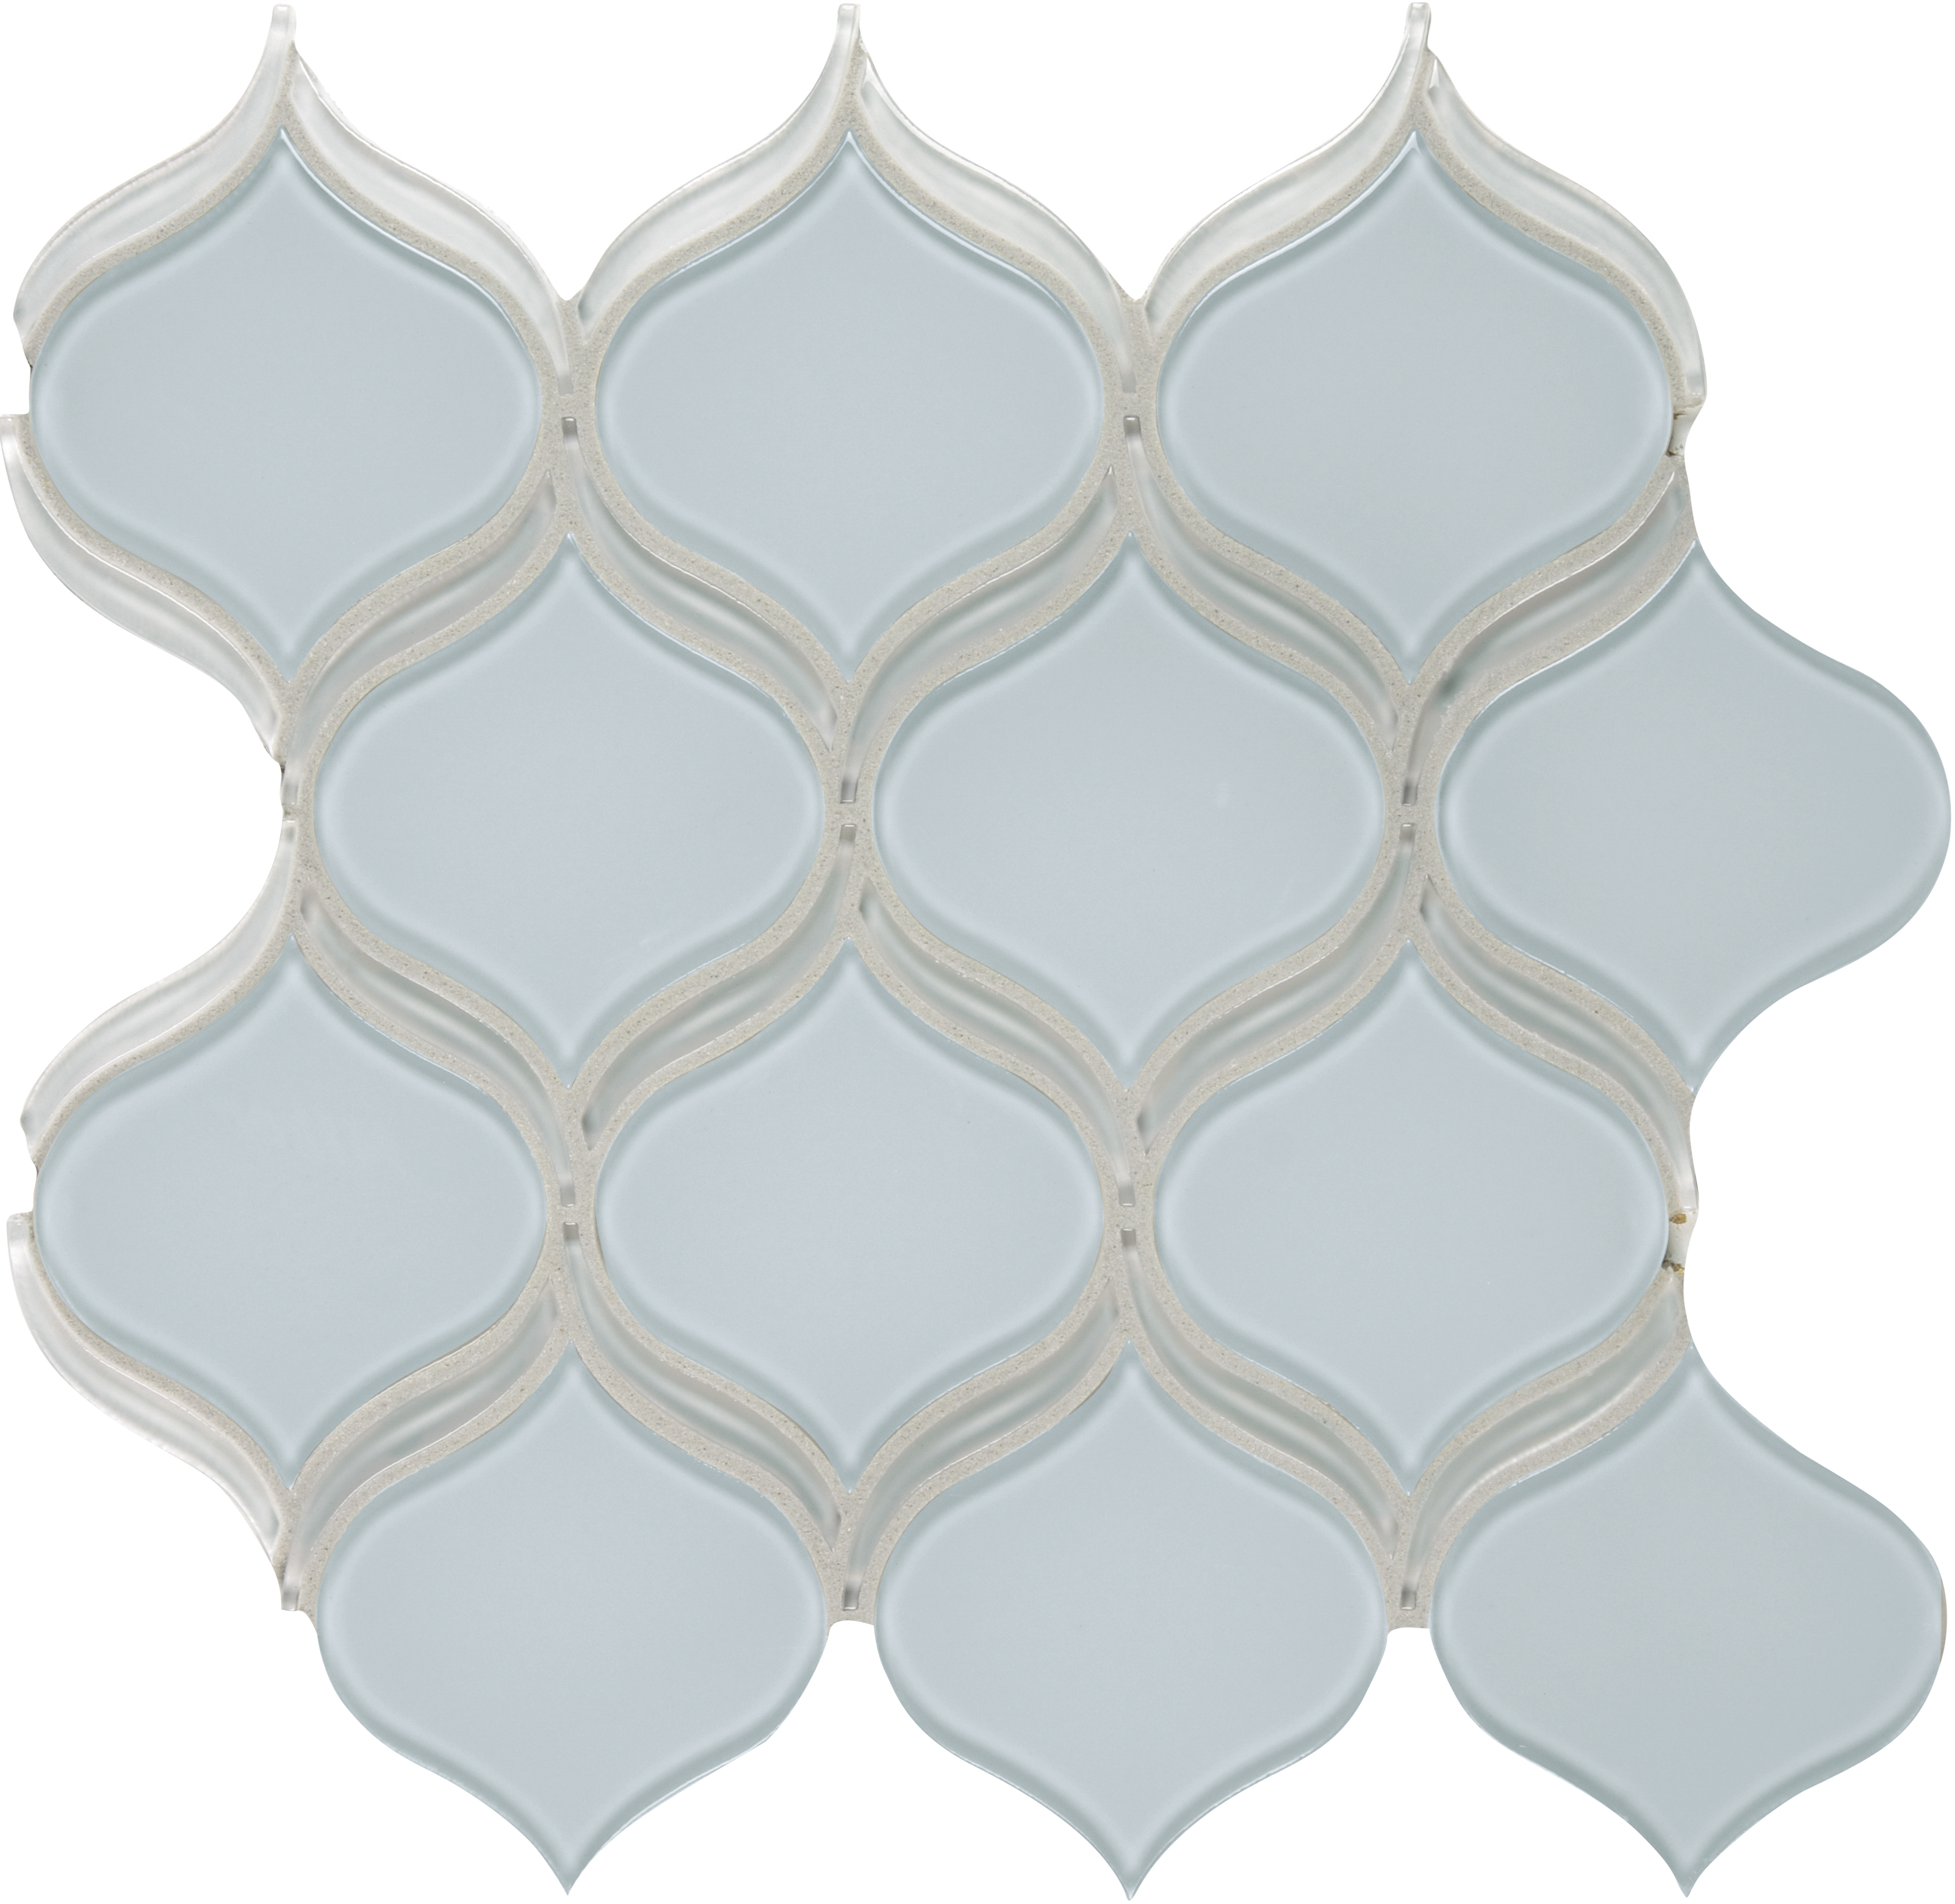 skylight arabesque pattern fused glass mosaic from element anatolia collection distributed by surface group international glossy finish rounded edge mesh shape